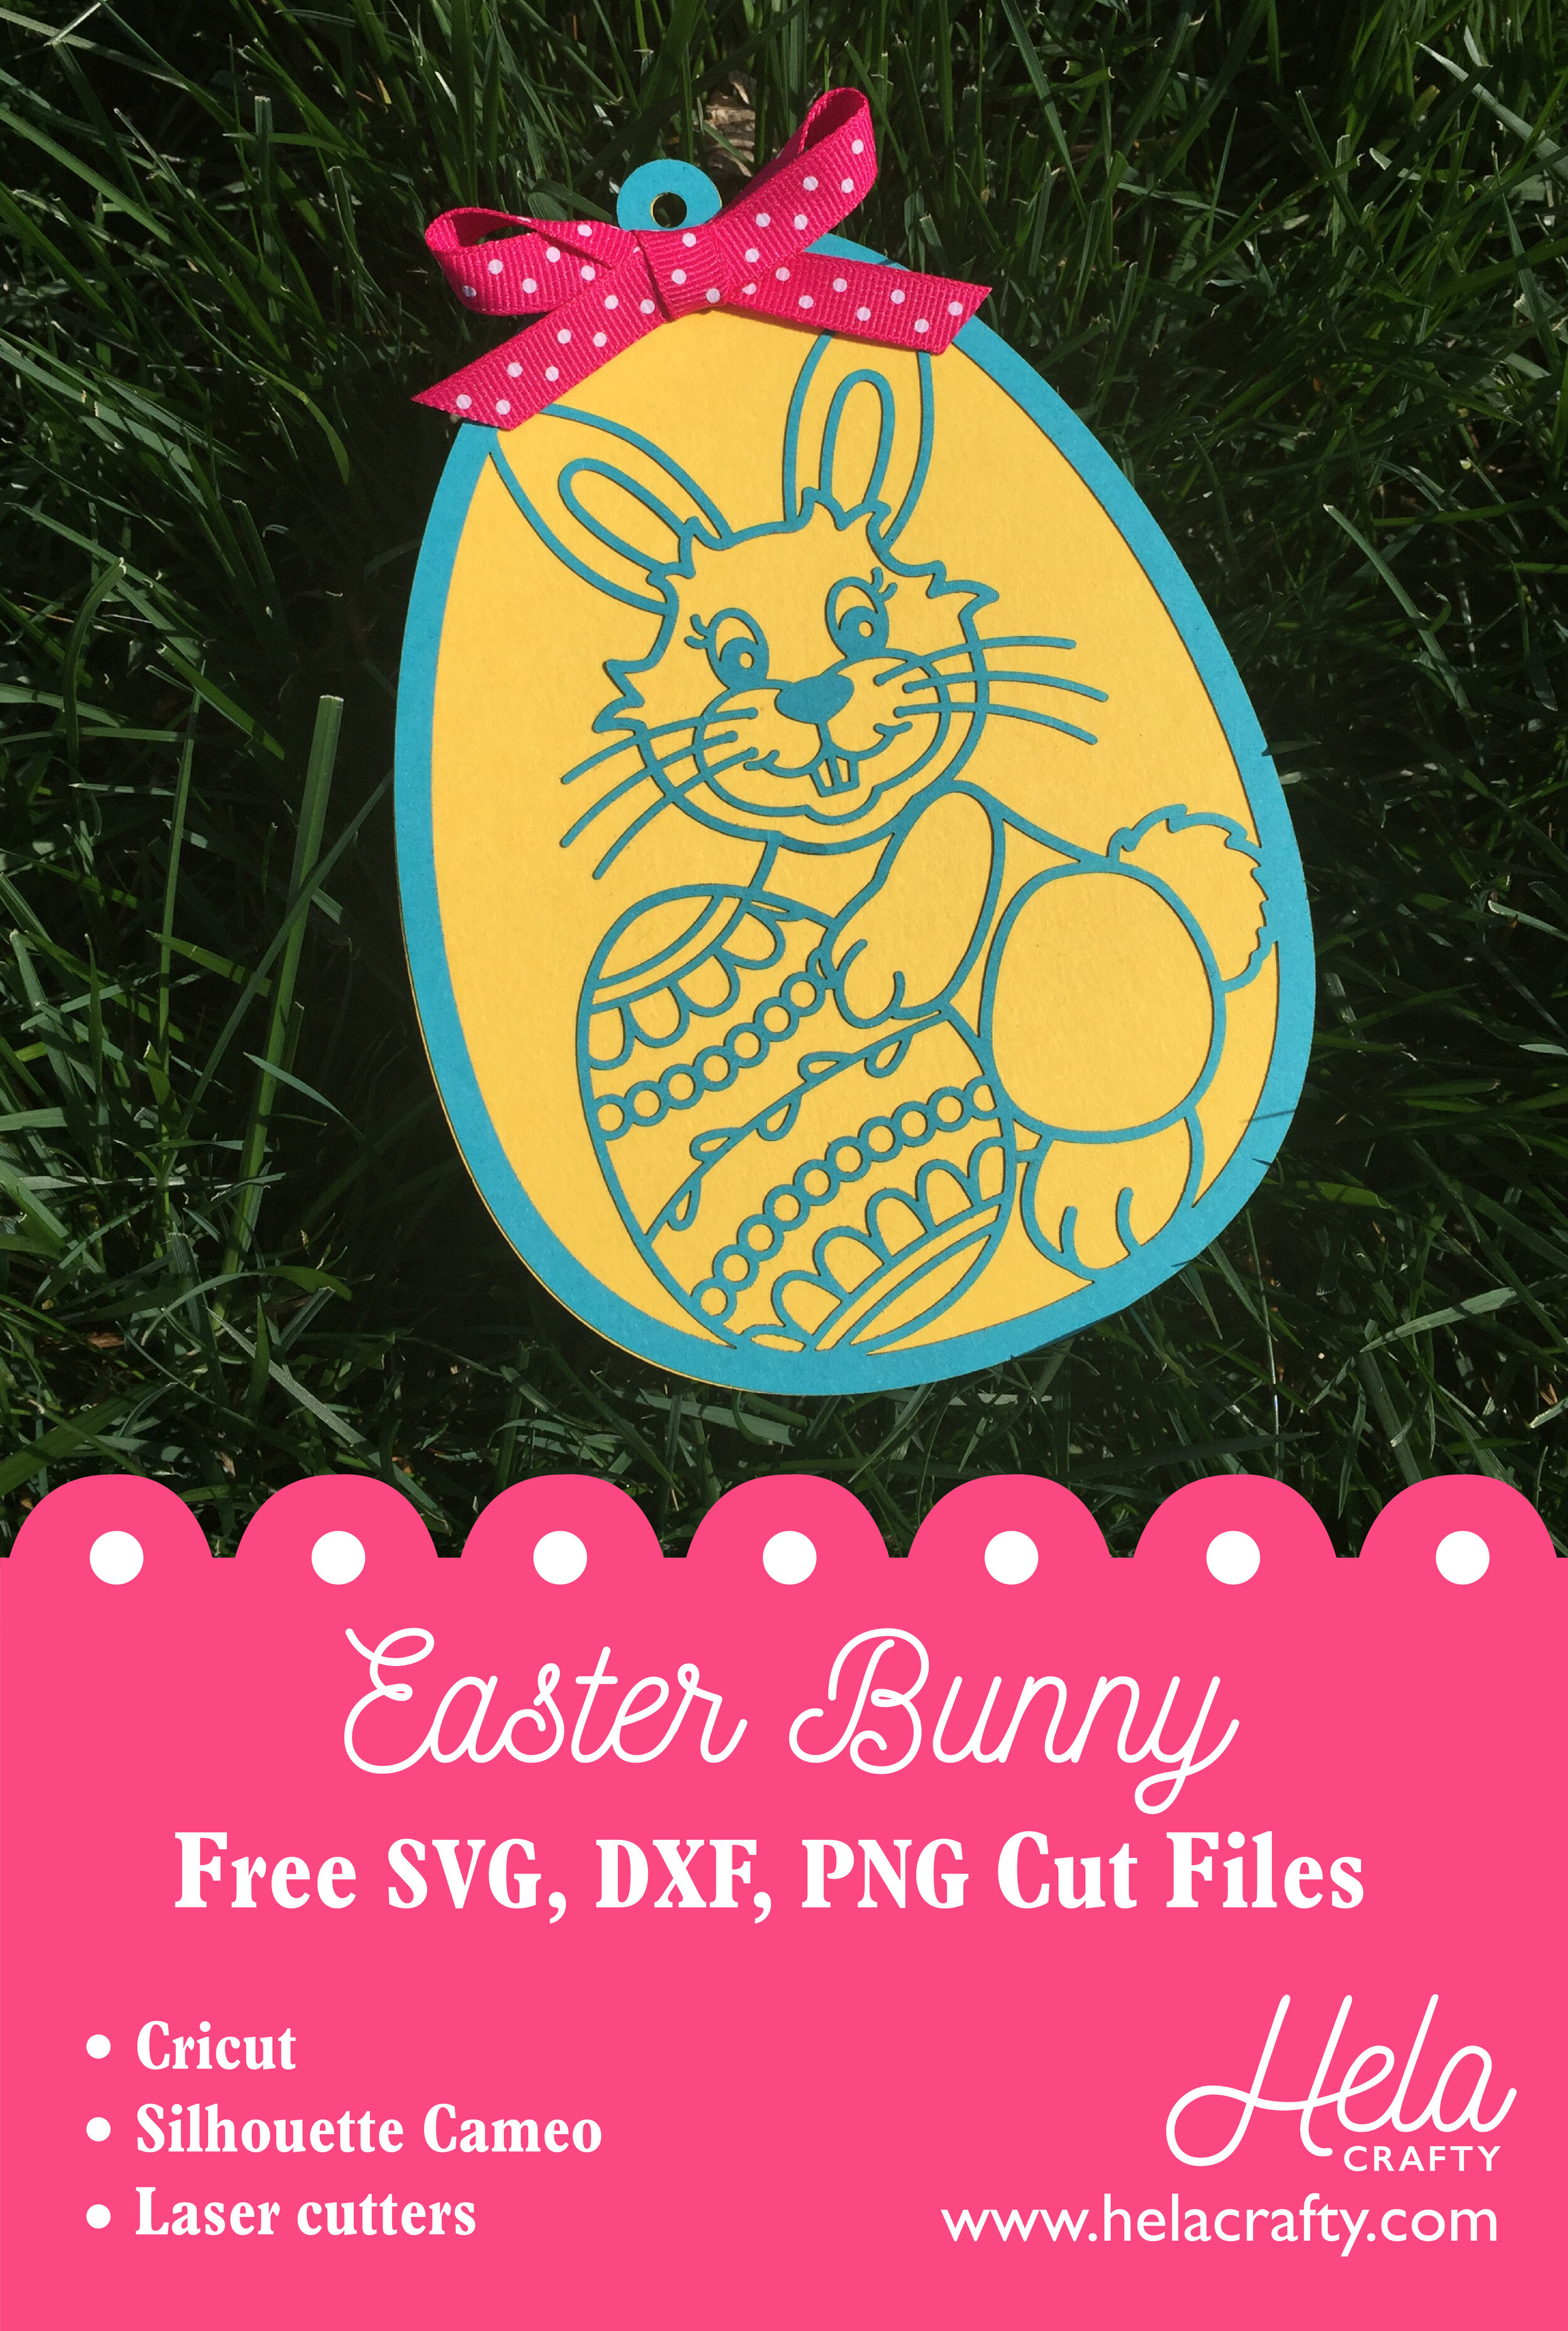 Download Hela Crafty Easter Bunny Free Svg Dxg Png Cut Files For Cricut Silhouette Glowforge Hela Crafty